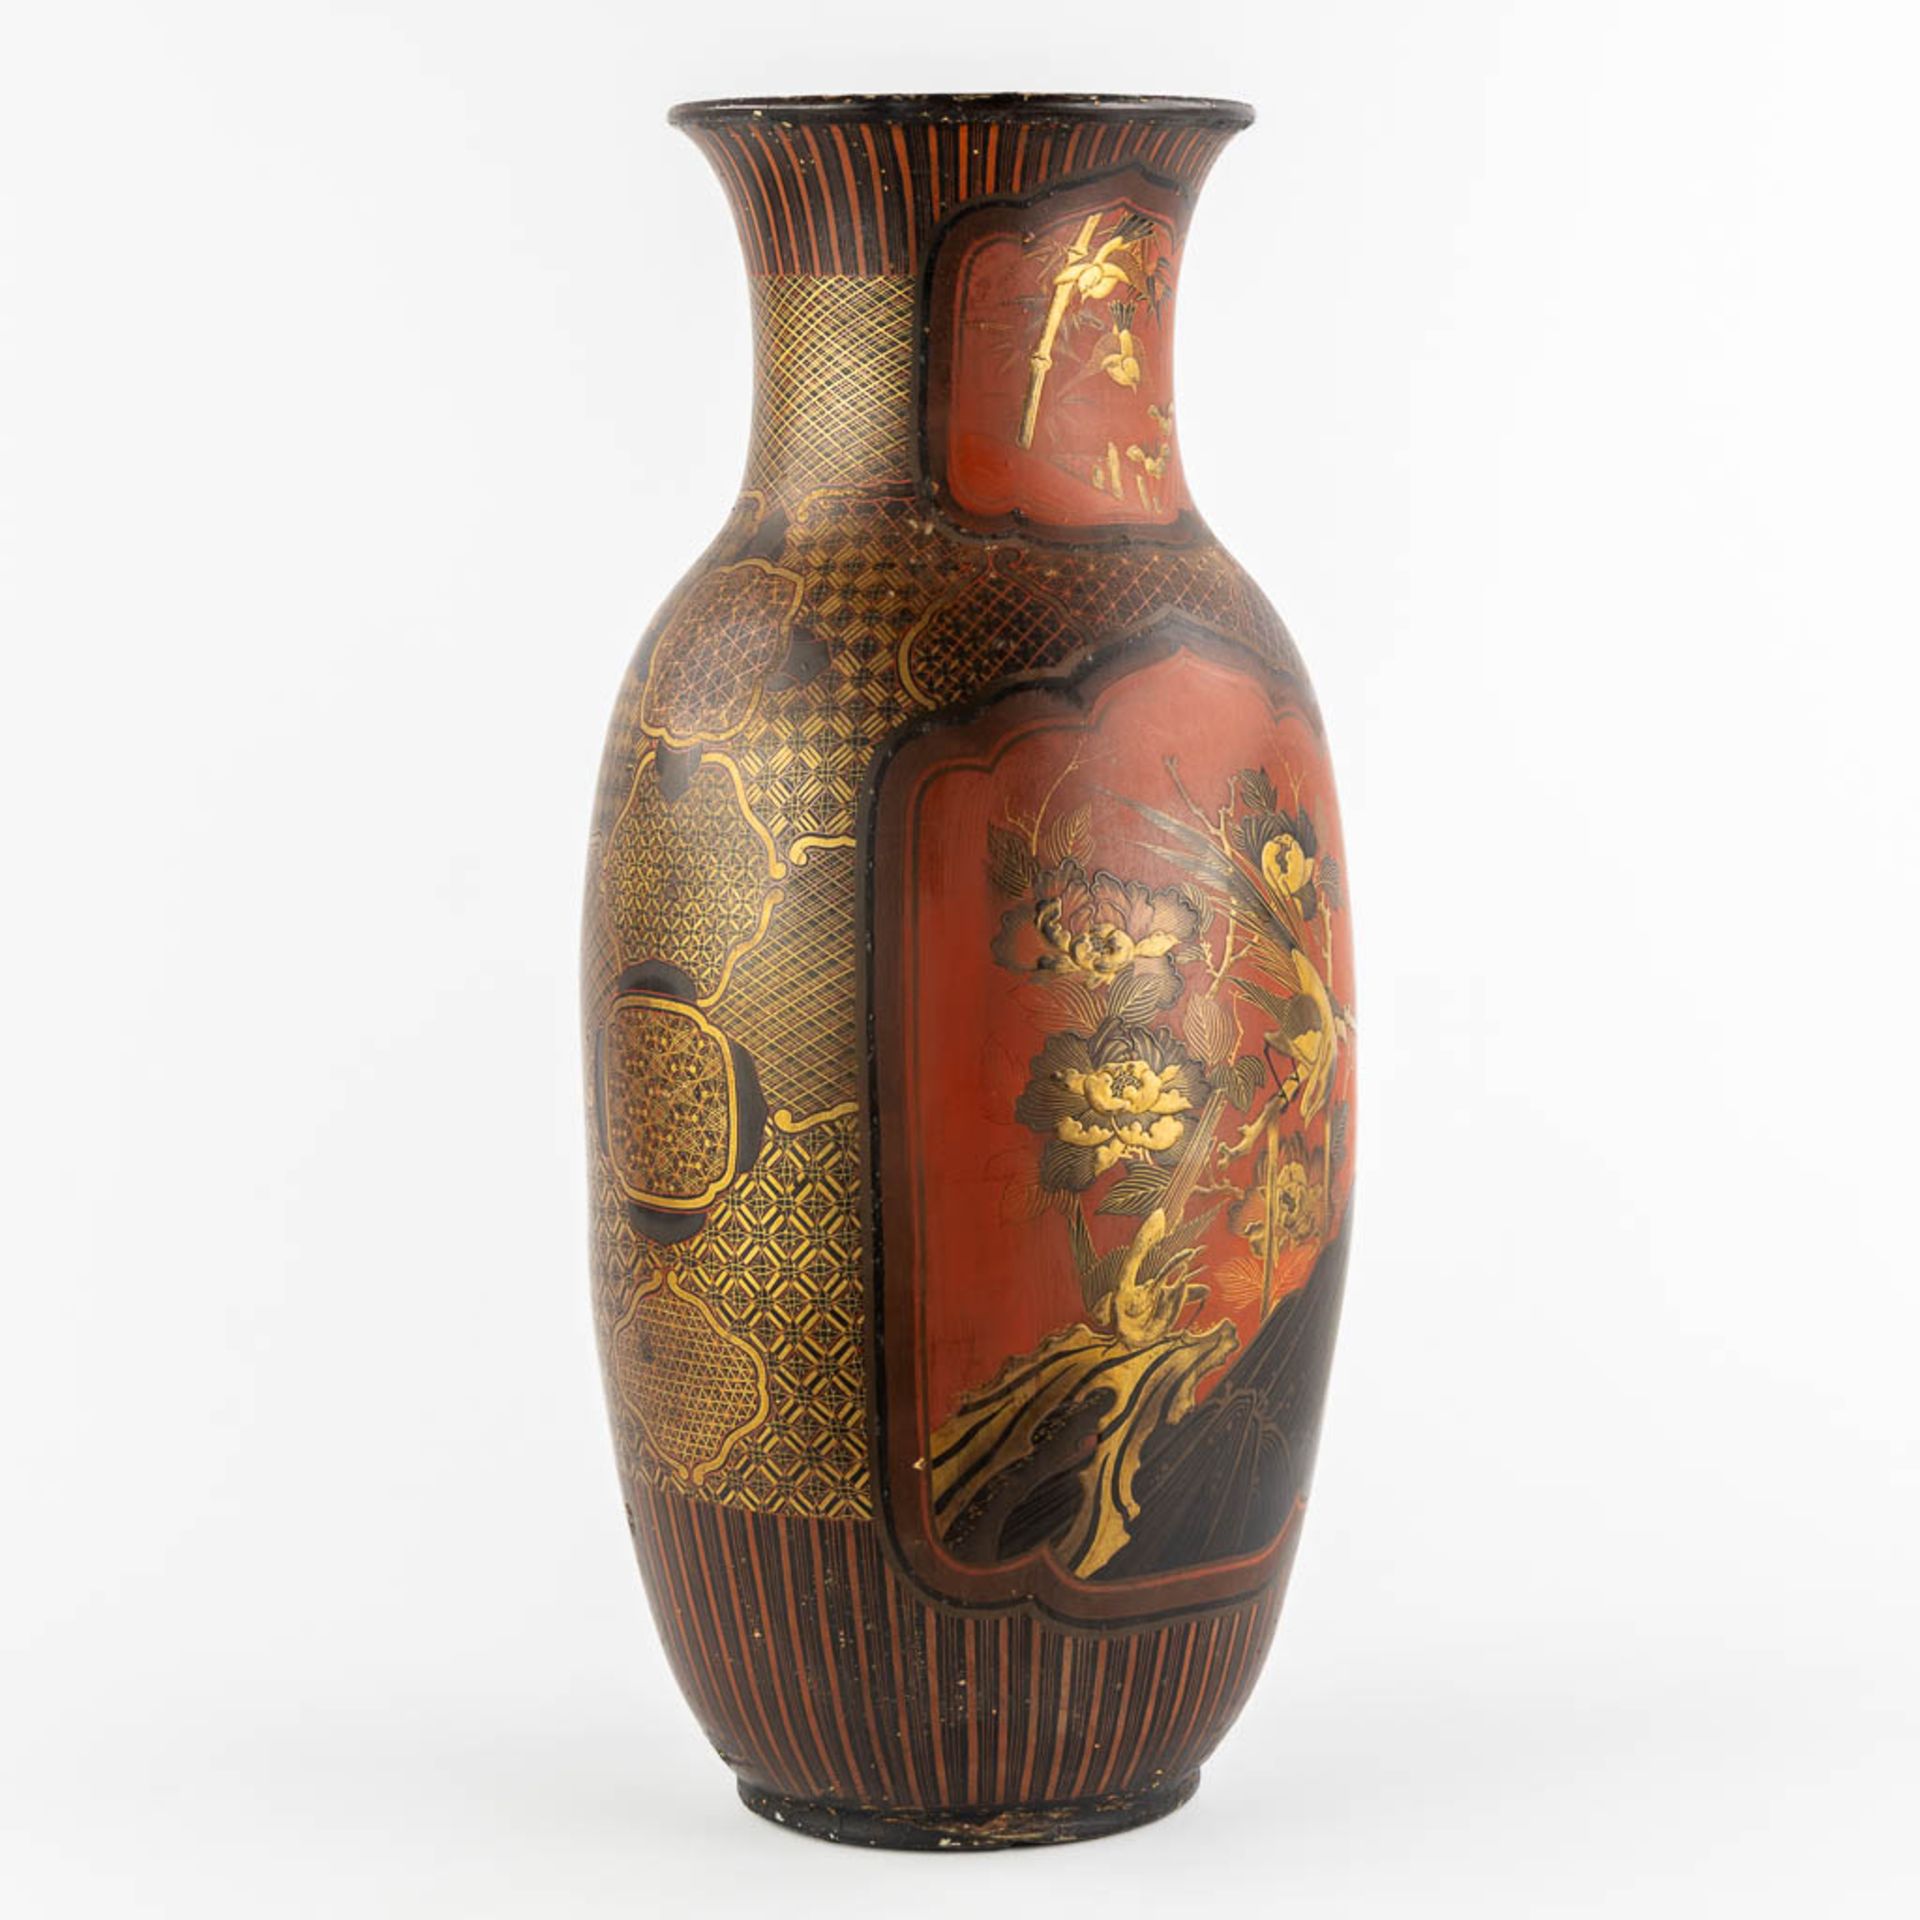 A Japanese porcelain vase, finished with red and gold lacquer. Meij period. (H:61 x D:27 cm) - Bild 3 aus 14